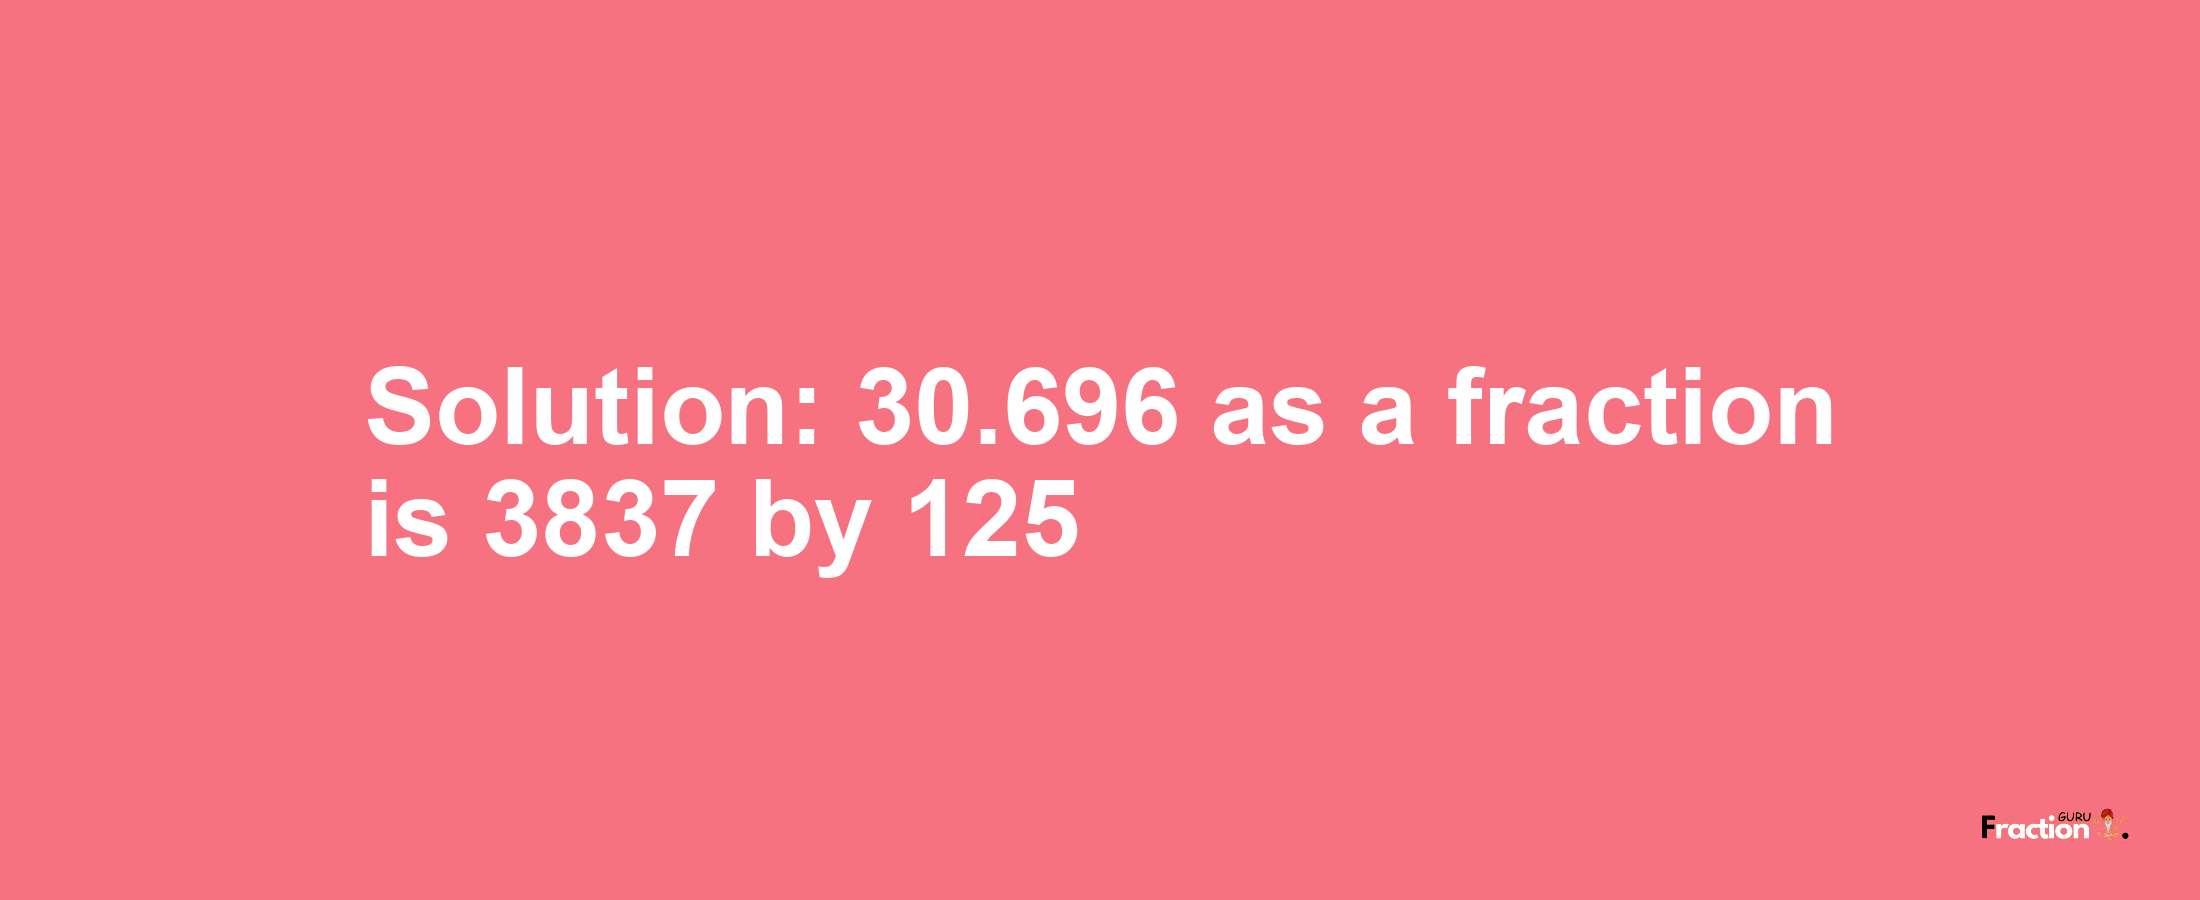 Solution:30.696 as a fraction is 3837/125